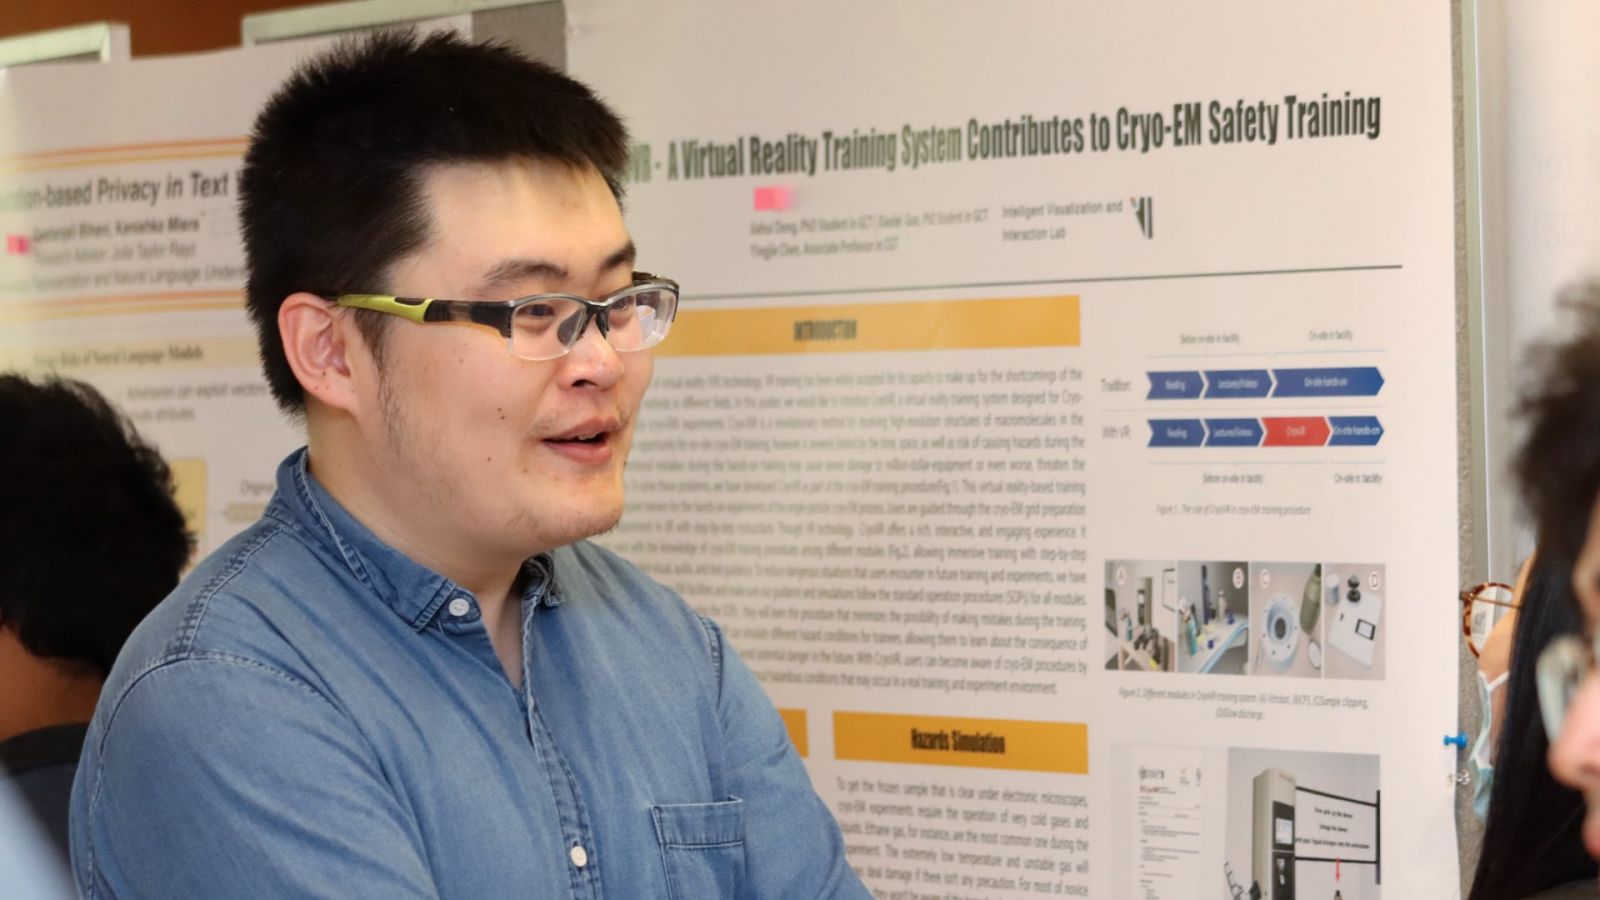 Jiahui Dong, graduate research assistant in the Department of Computer Graphics Technology, discusses his research project "CryoVR - Virtual Reality Augmented CryoEM Training" (Purdue University photo/John O'Malley)